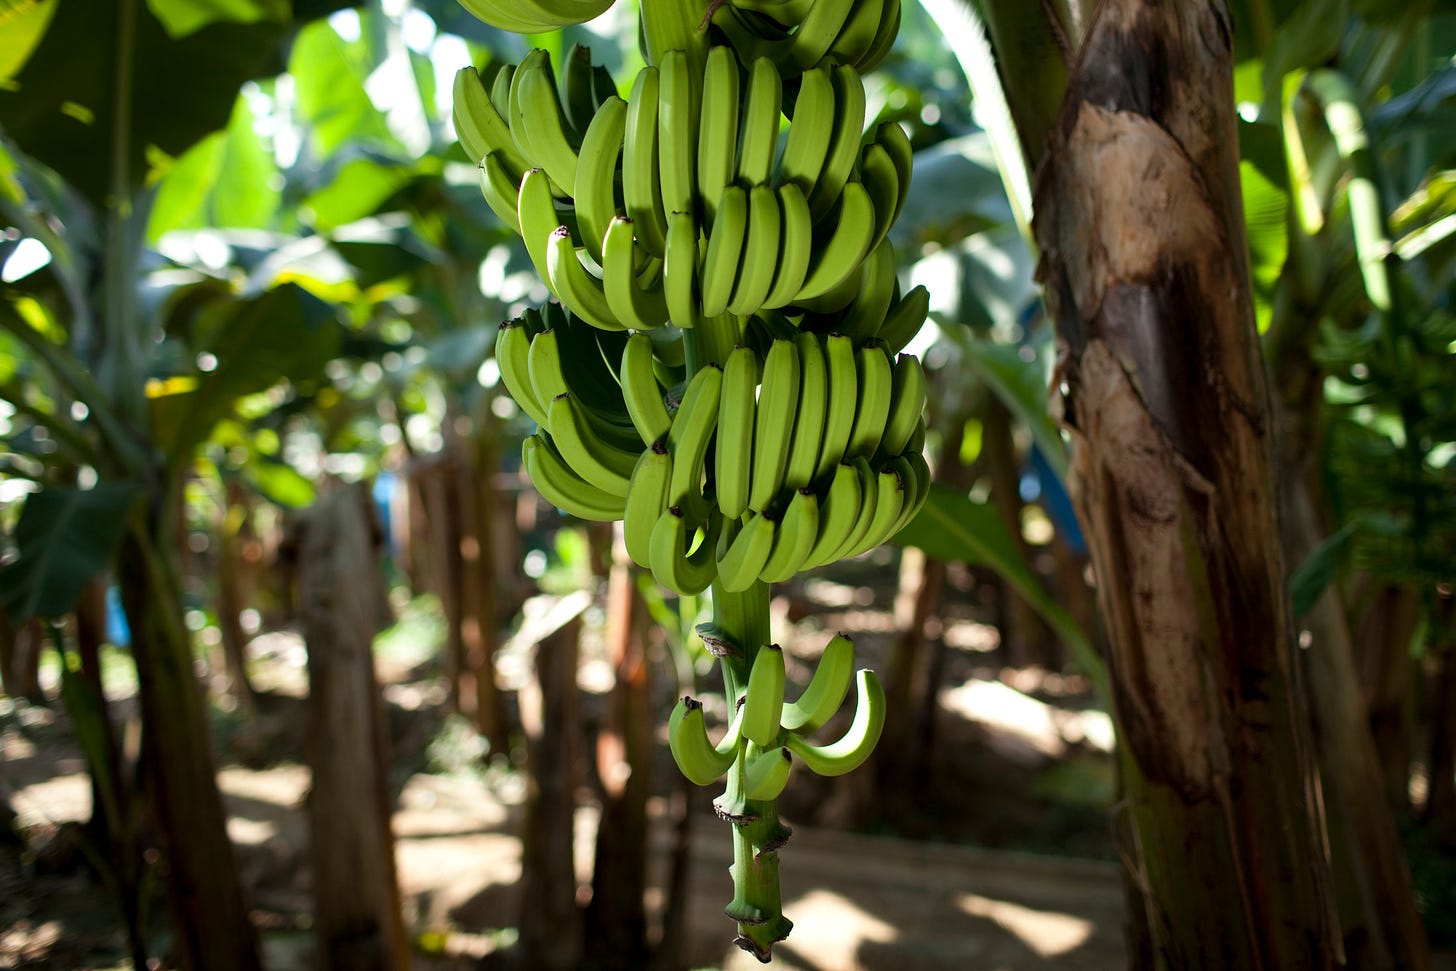 Cavendish bananas in Colombia.